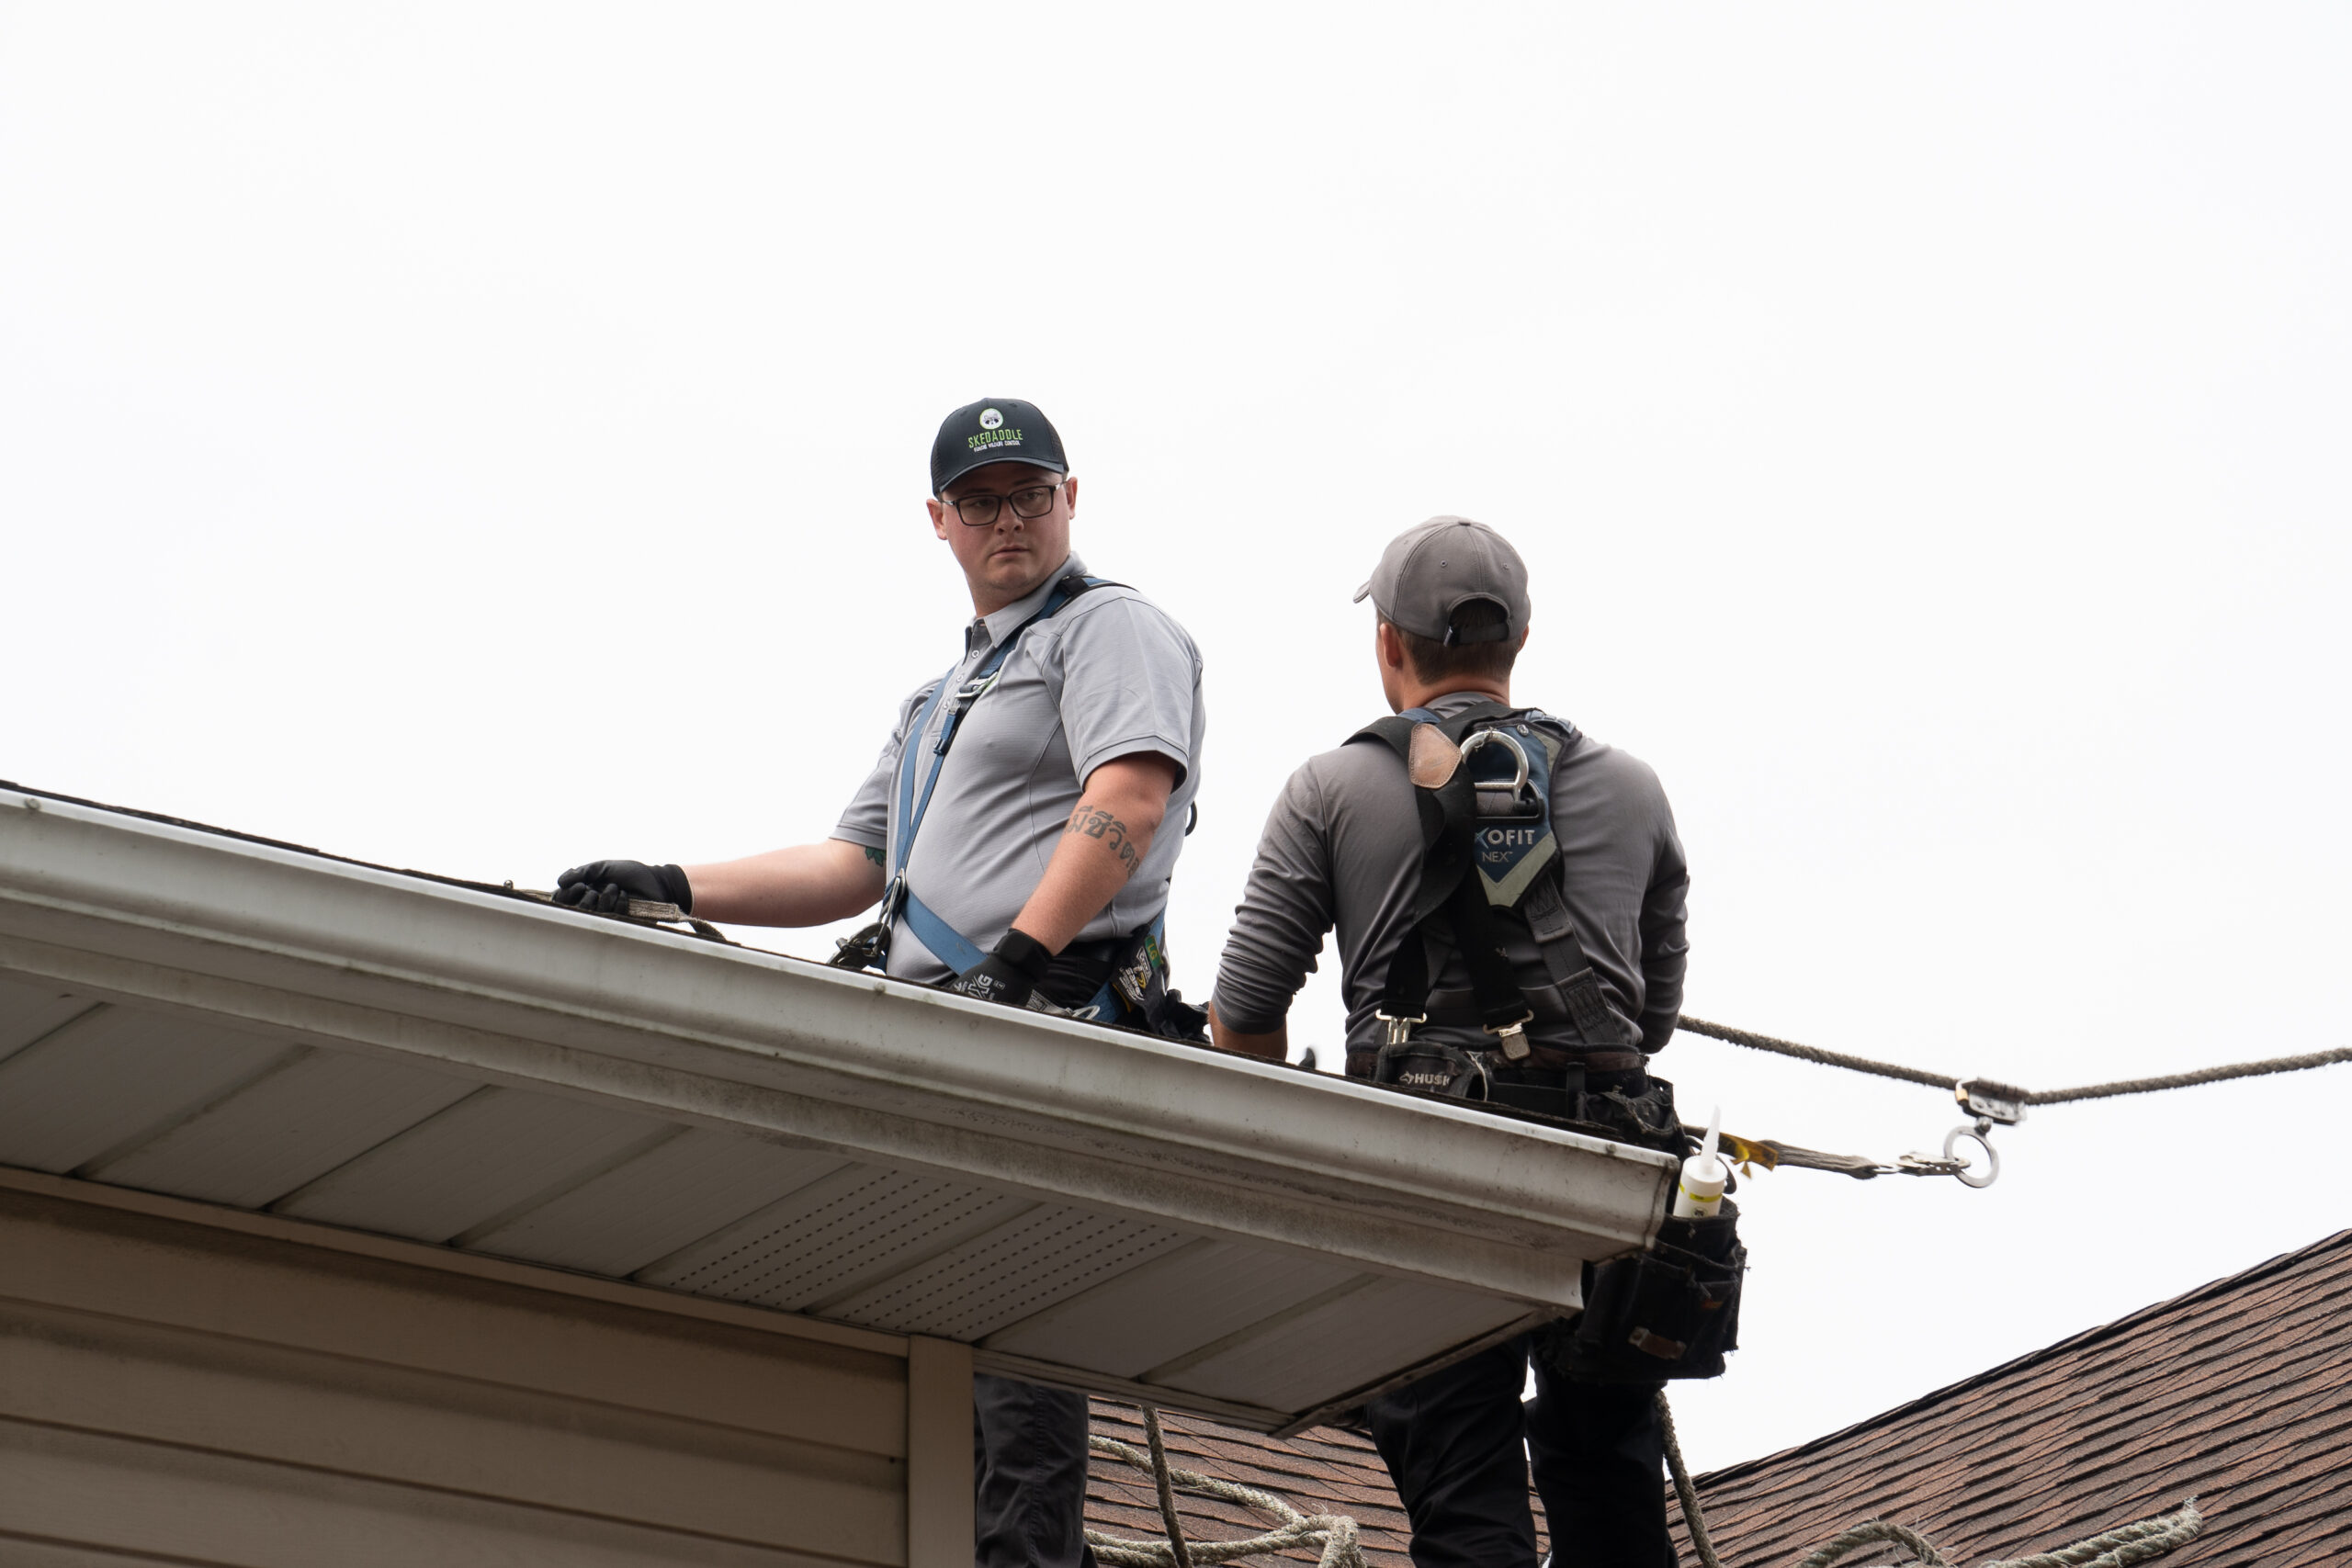 Maryland technician stands on roof